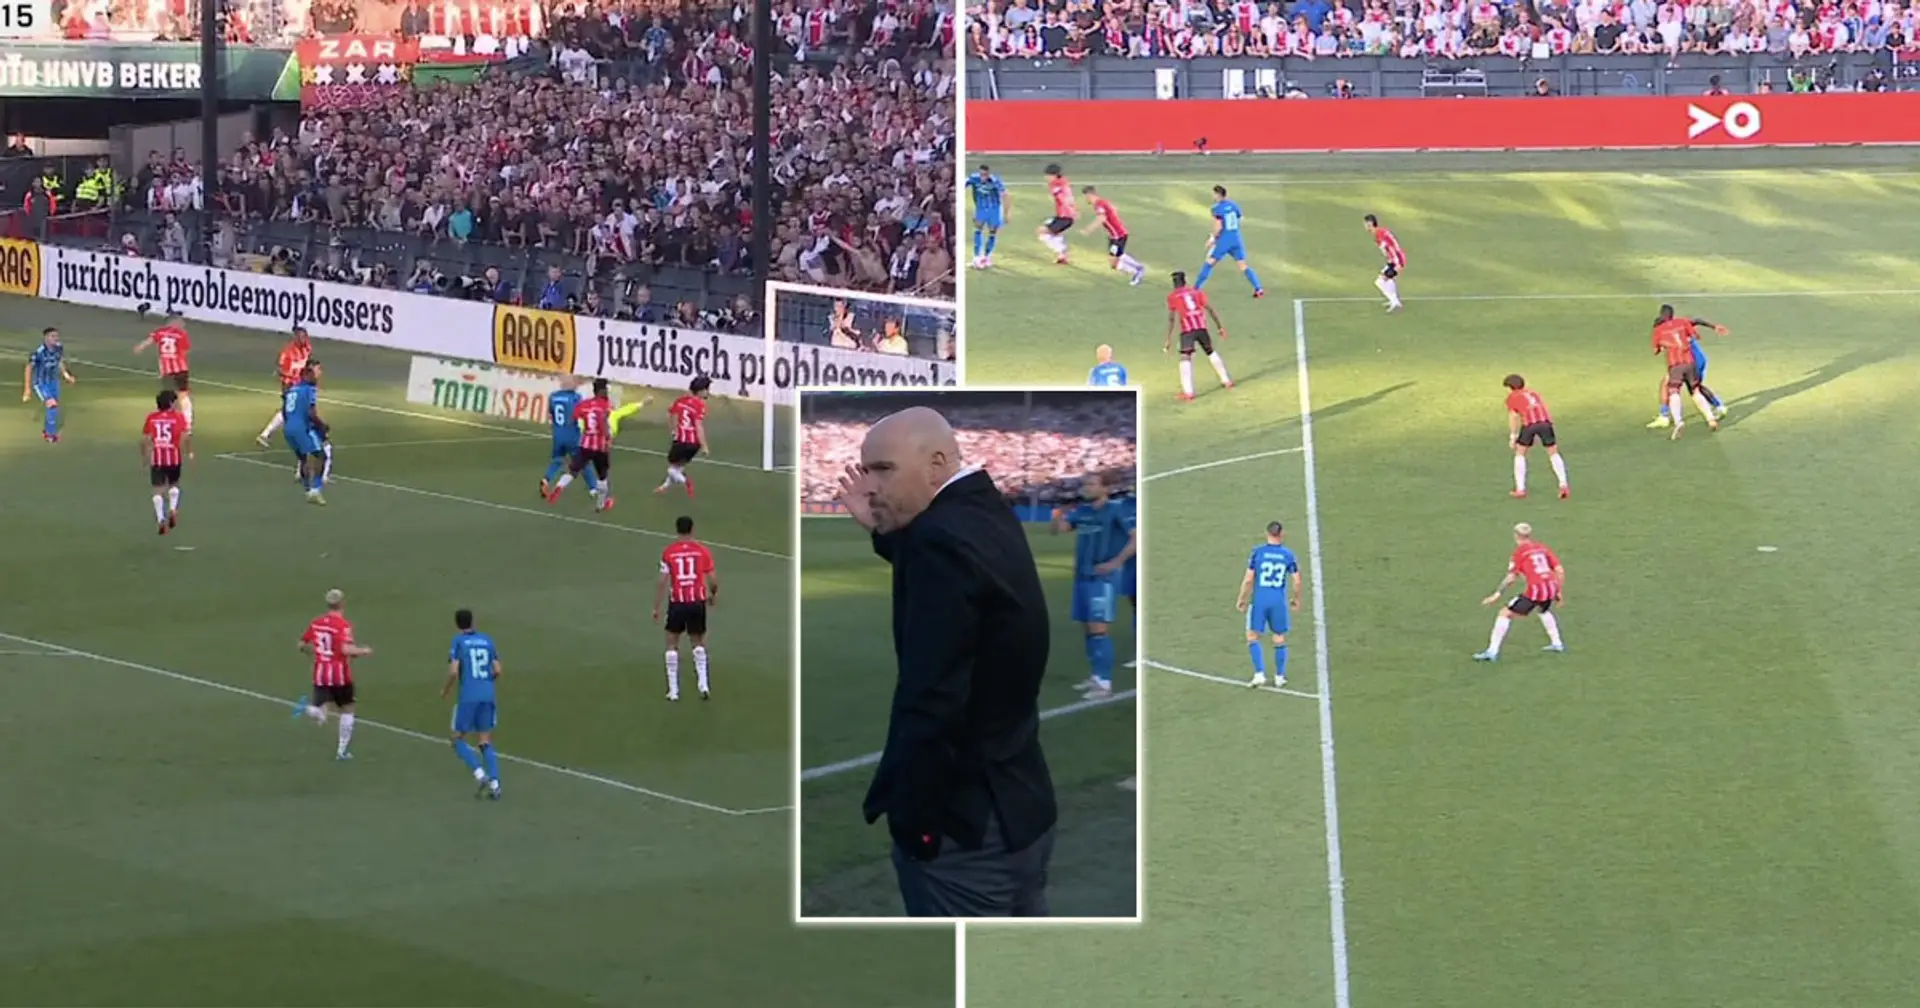 Ten Hag's Ajax lose Dutch FA Cup final to PSV - concede twice in 90 seconds and have 2 goals ruled out